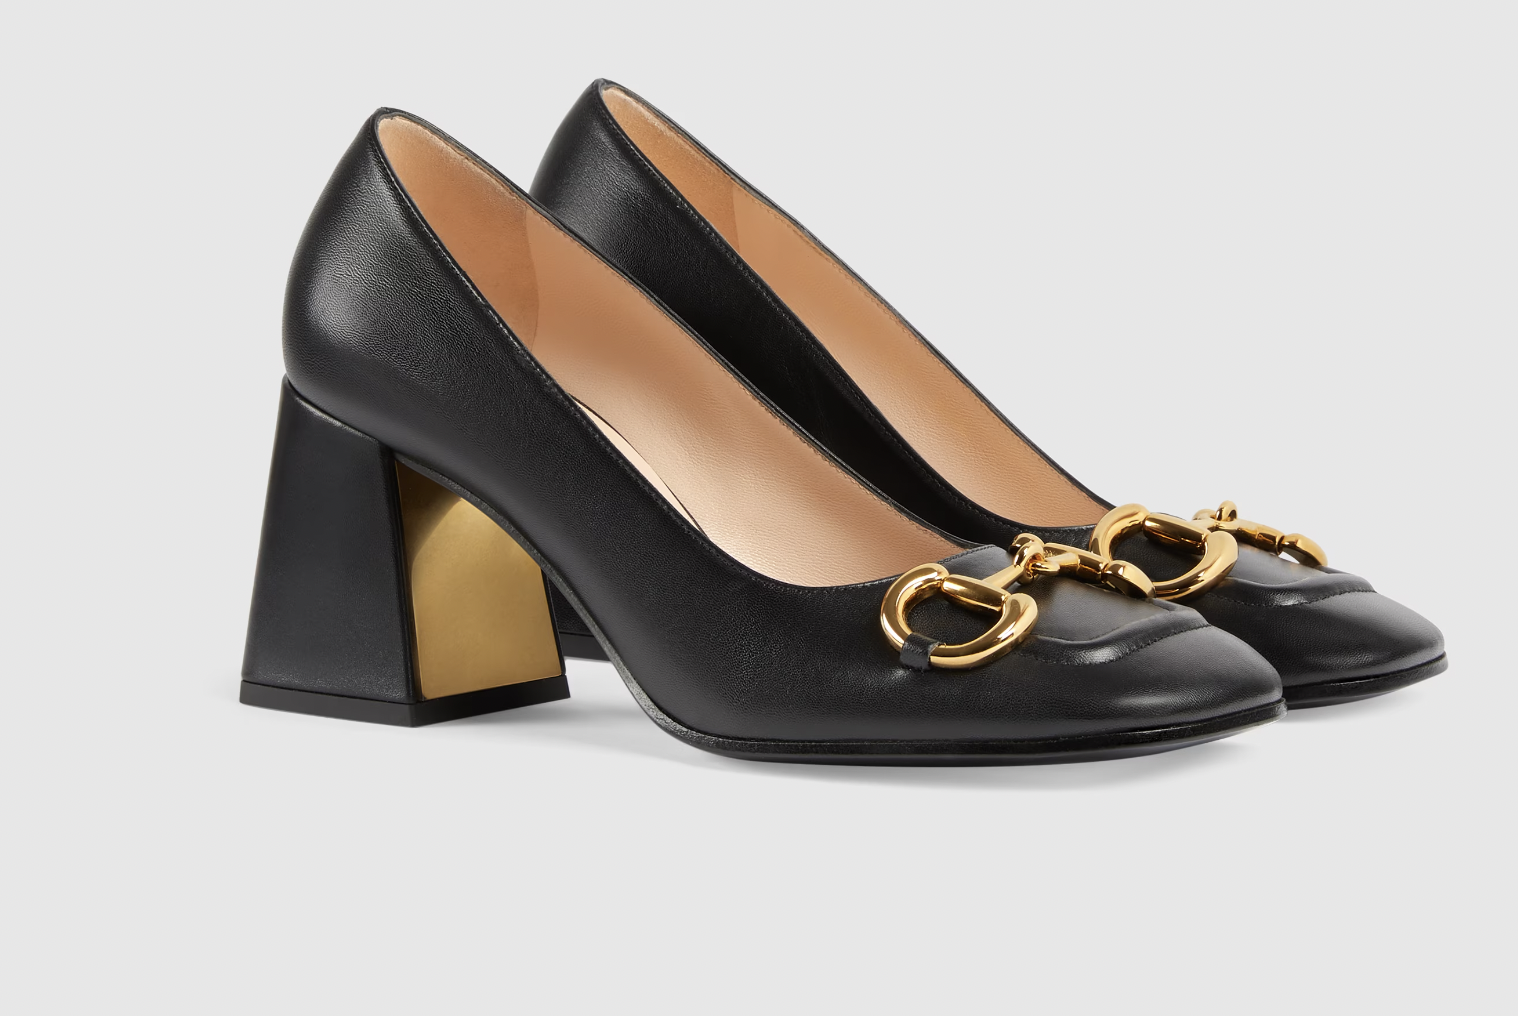 These £49 M&S shoes are so similar to an iconic Gucci pair | Woman & Home